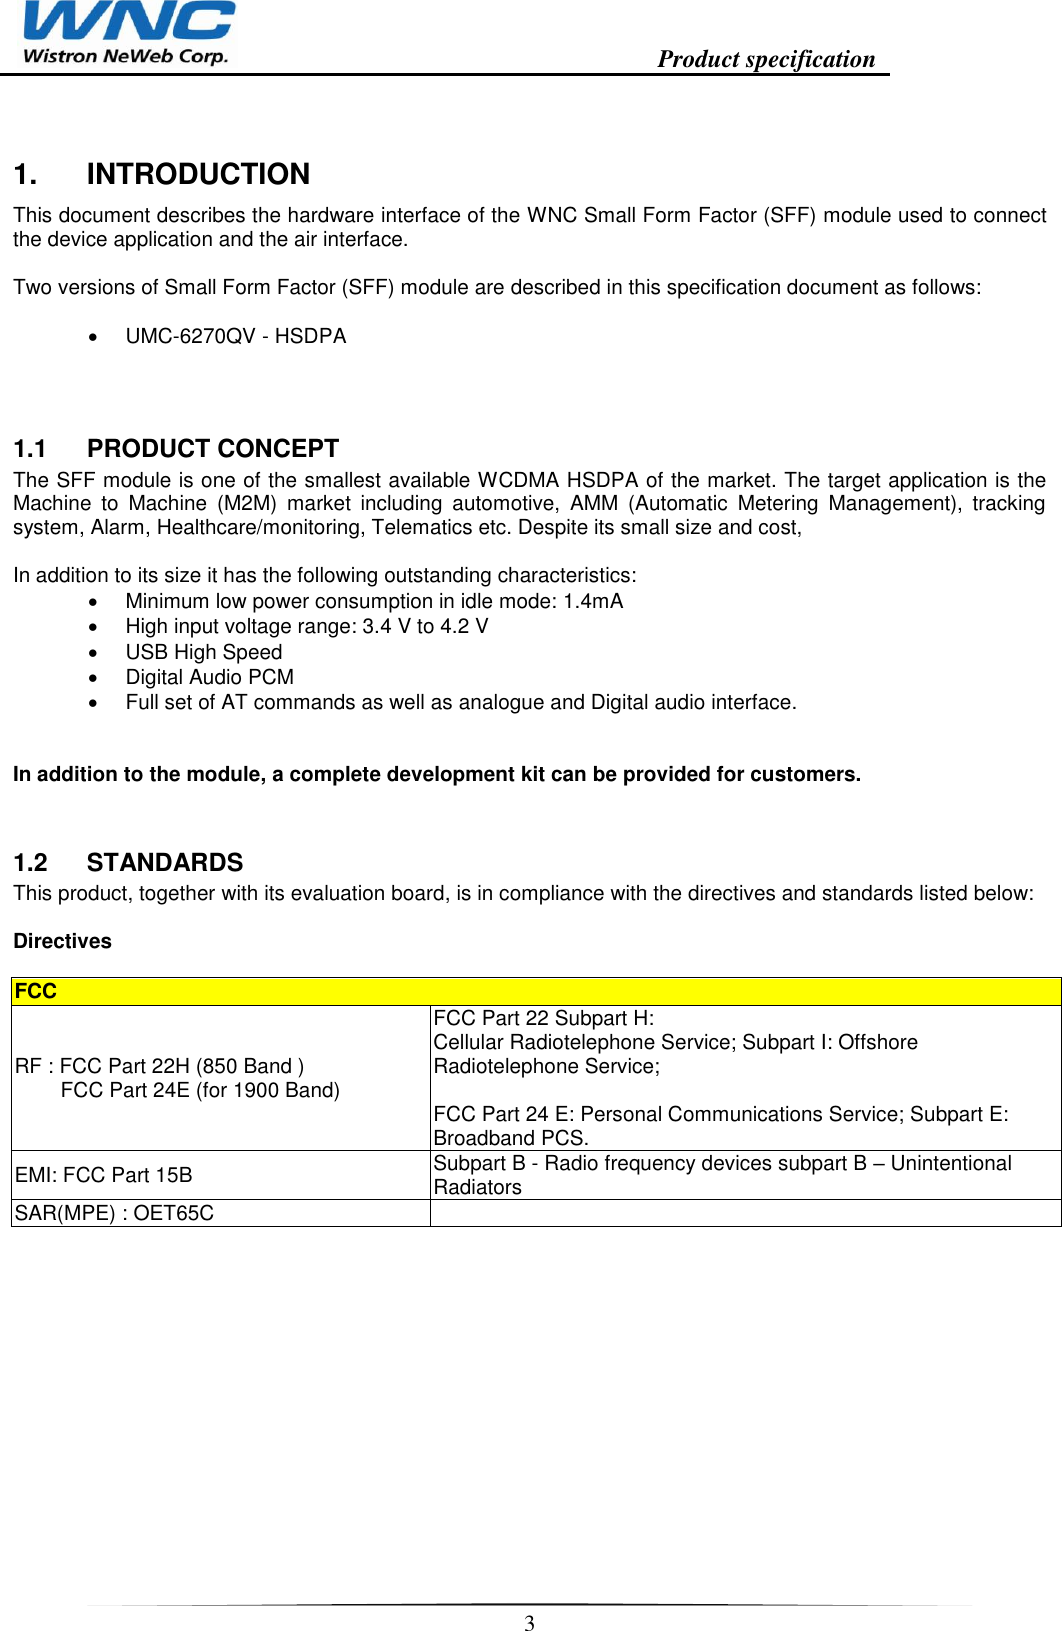                                                                    Product specification    3  1.  INTRODUCTION This document describes the hardware interface of the WNC Small Form Factor (SFF) module used to connect the device application and the air interface.  Two versions of Small Form Factor (SFF) module are described in this specification document as follows:     UMC-6270QV - HSDPA  1.1  PRODUCT CONCEPT The SFF module is one of the smallest available WCDMA HSDPA of the market. The target application is the Machine  to  Machine  (M2M)  market  including  automotive,  AMM  (Automatic  Metering  Management),  tracking system, Alarm, Healthcare/monitoring, Telematics etc. Despite its small size and cost,   In addition to its size it has the following outstanding characteristics:   Minimum low power consumption in idle mode: 1.4mA   High input voltage range: 3.4 V to 4.2 V   USB High Speed   Digital Audio PCM   Full set of AT commands as well as analogue and Digital audio interface.   In addition to the module, a complete development kit can be provided for customers. 1.2  STANDARDS This product, together with its evaluation board, is in compliance with the directives and standards listed below:  Directives  FCC RF : FCC Part 22H (850 Band )          FCC Part 24E (for 1900 Band) FCC Part 22 Subpart H:  Cellular Radiotelephone Service; Subpart I: Offshore Radiotelephone Service;   FCC Part 24 E: Personal Communications Service; Subpart E: Broadband PCS.  EMI: FCC Part 15B Subpart B - Radio frequency devices subpart B – Unintentional Radiators SAR(MPE) : OET65C       